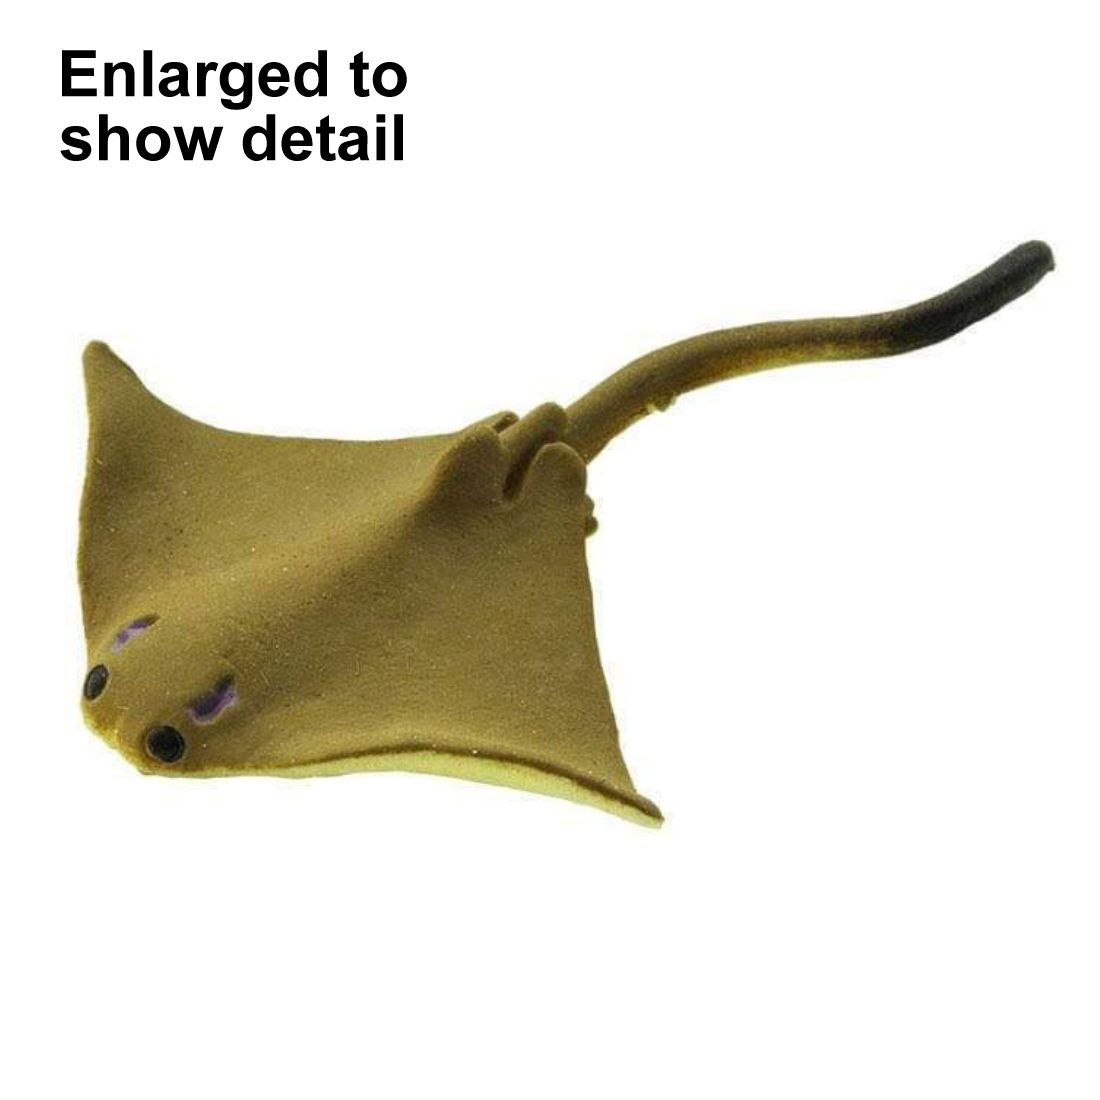 Cownose Ray Mini Figurine with the text Enlarged to Show Detail